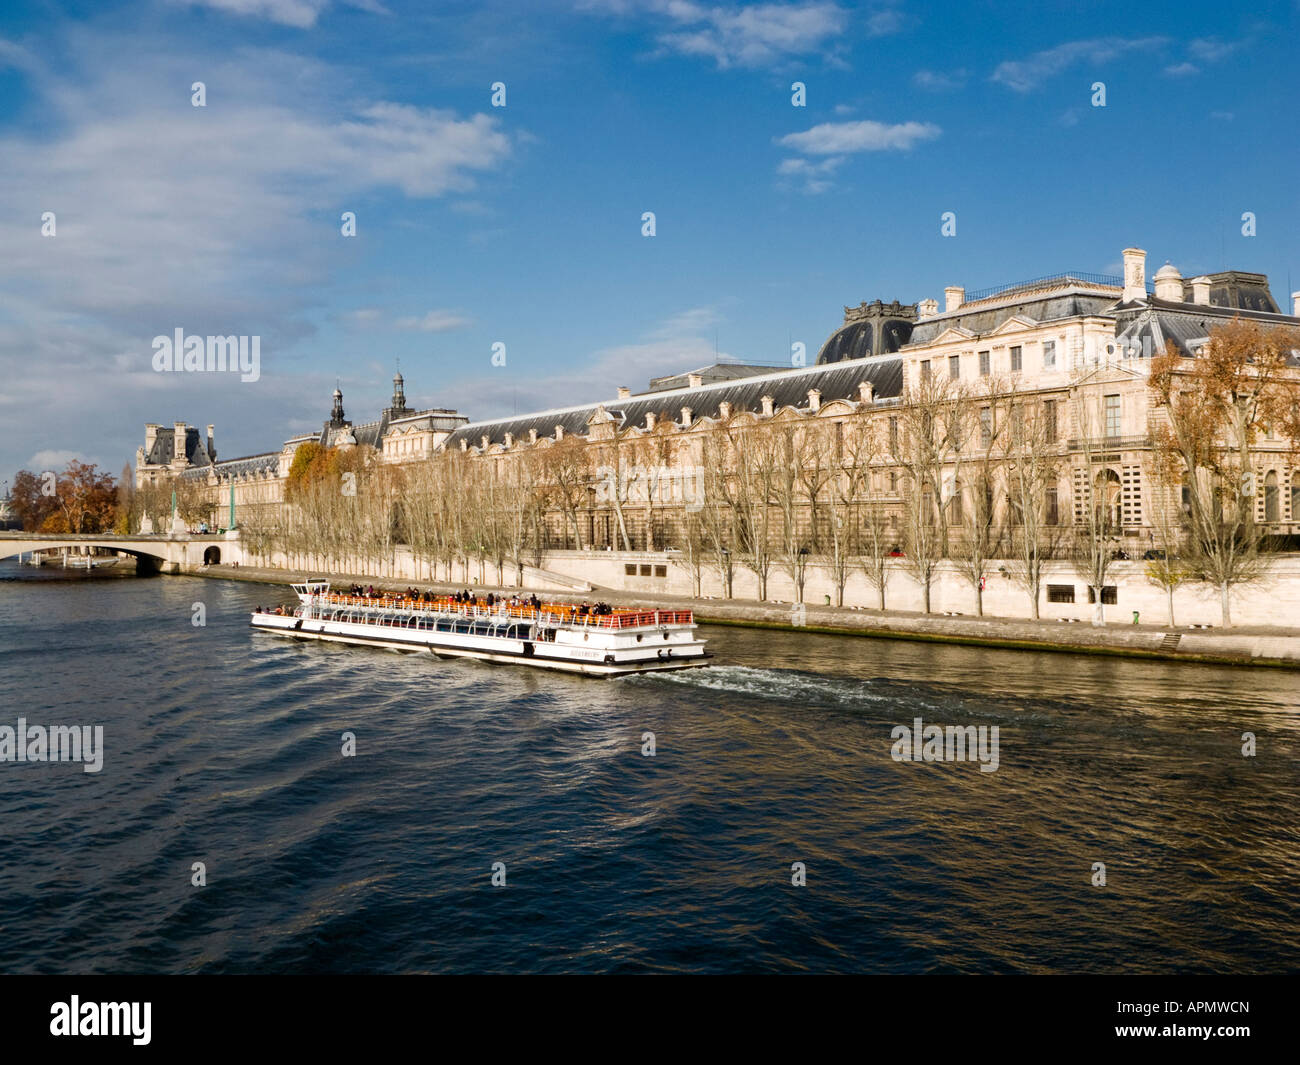 Bateaux Mouches sightseeing cruise boat on the Seine next to the Louvre and Pont du Carrousel Paris France Europe Stock Photo